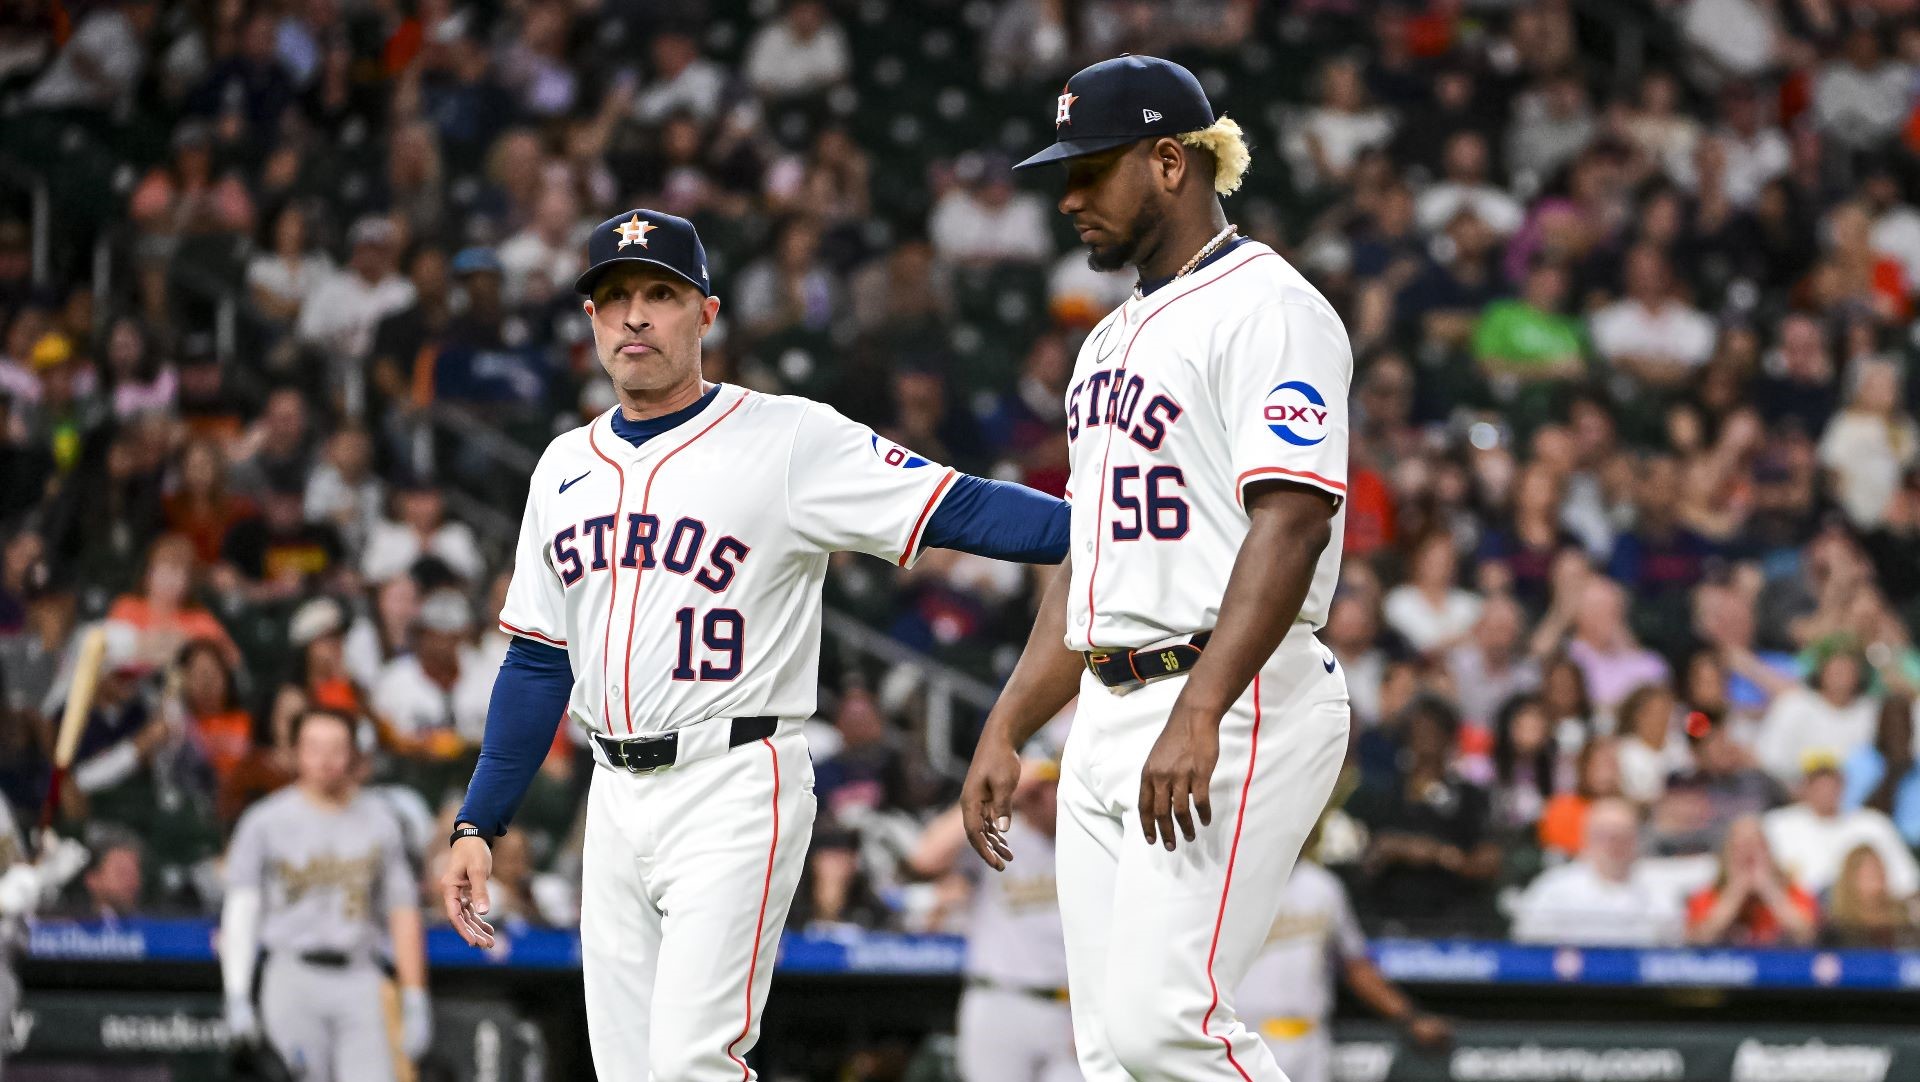 Ronel Blanco #56 is walked off the field by Joe Espada #19 of the Houston Astros after being ejected in the fourth inning against the Oakland Athletics.